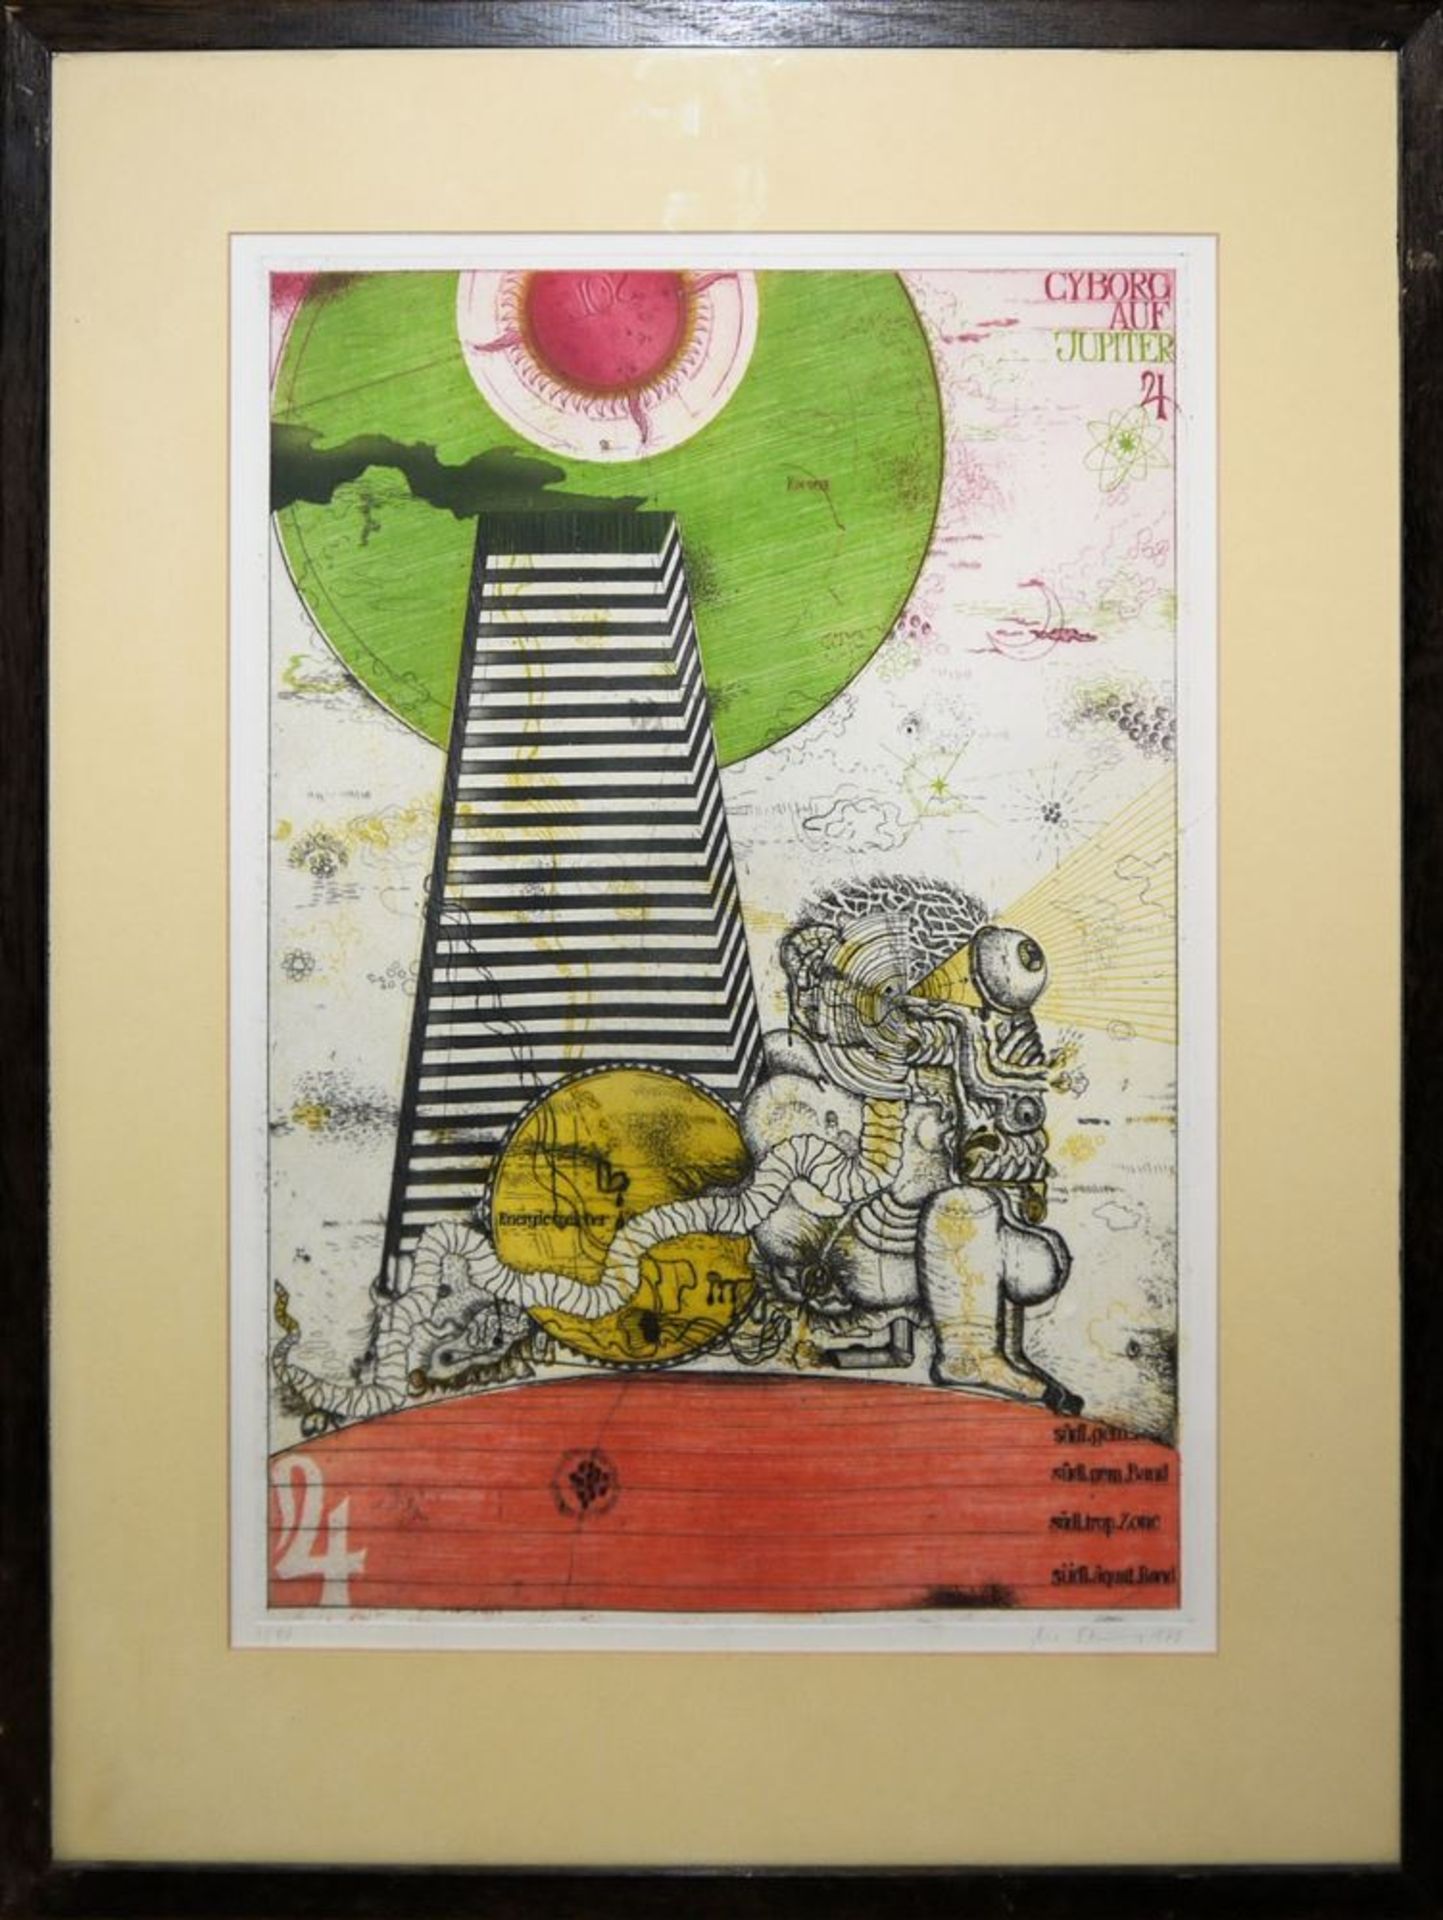 Uwe Bremer, "1ste Sonnencyclopaedie", portfolio with 4 large colour etchings, sign., Ed. Hilger Vie